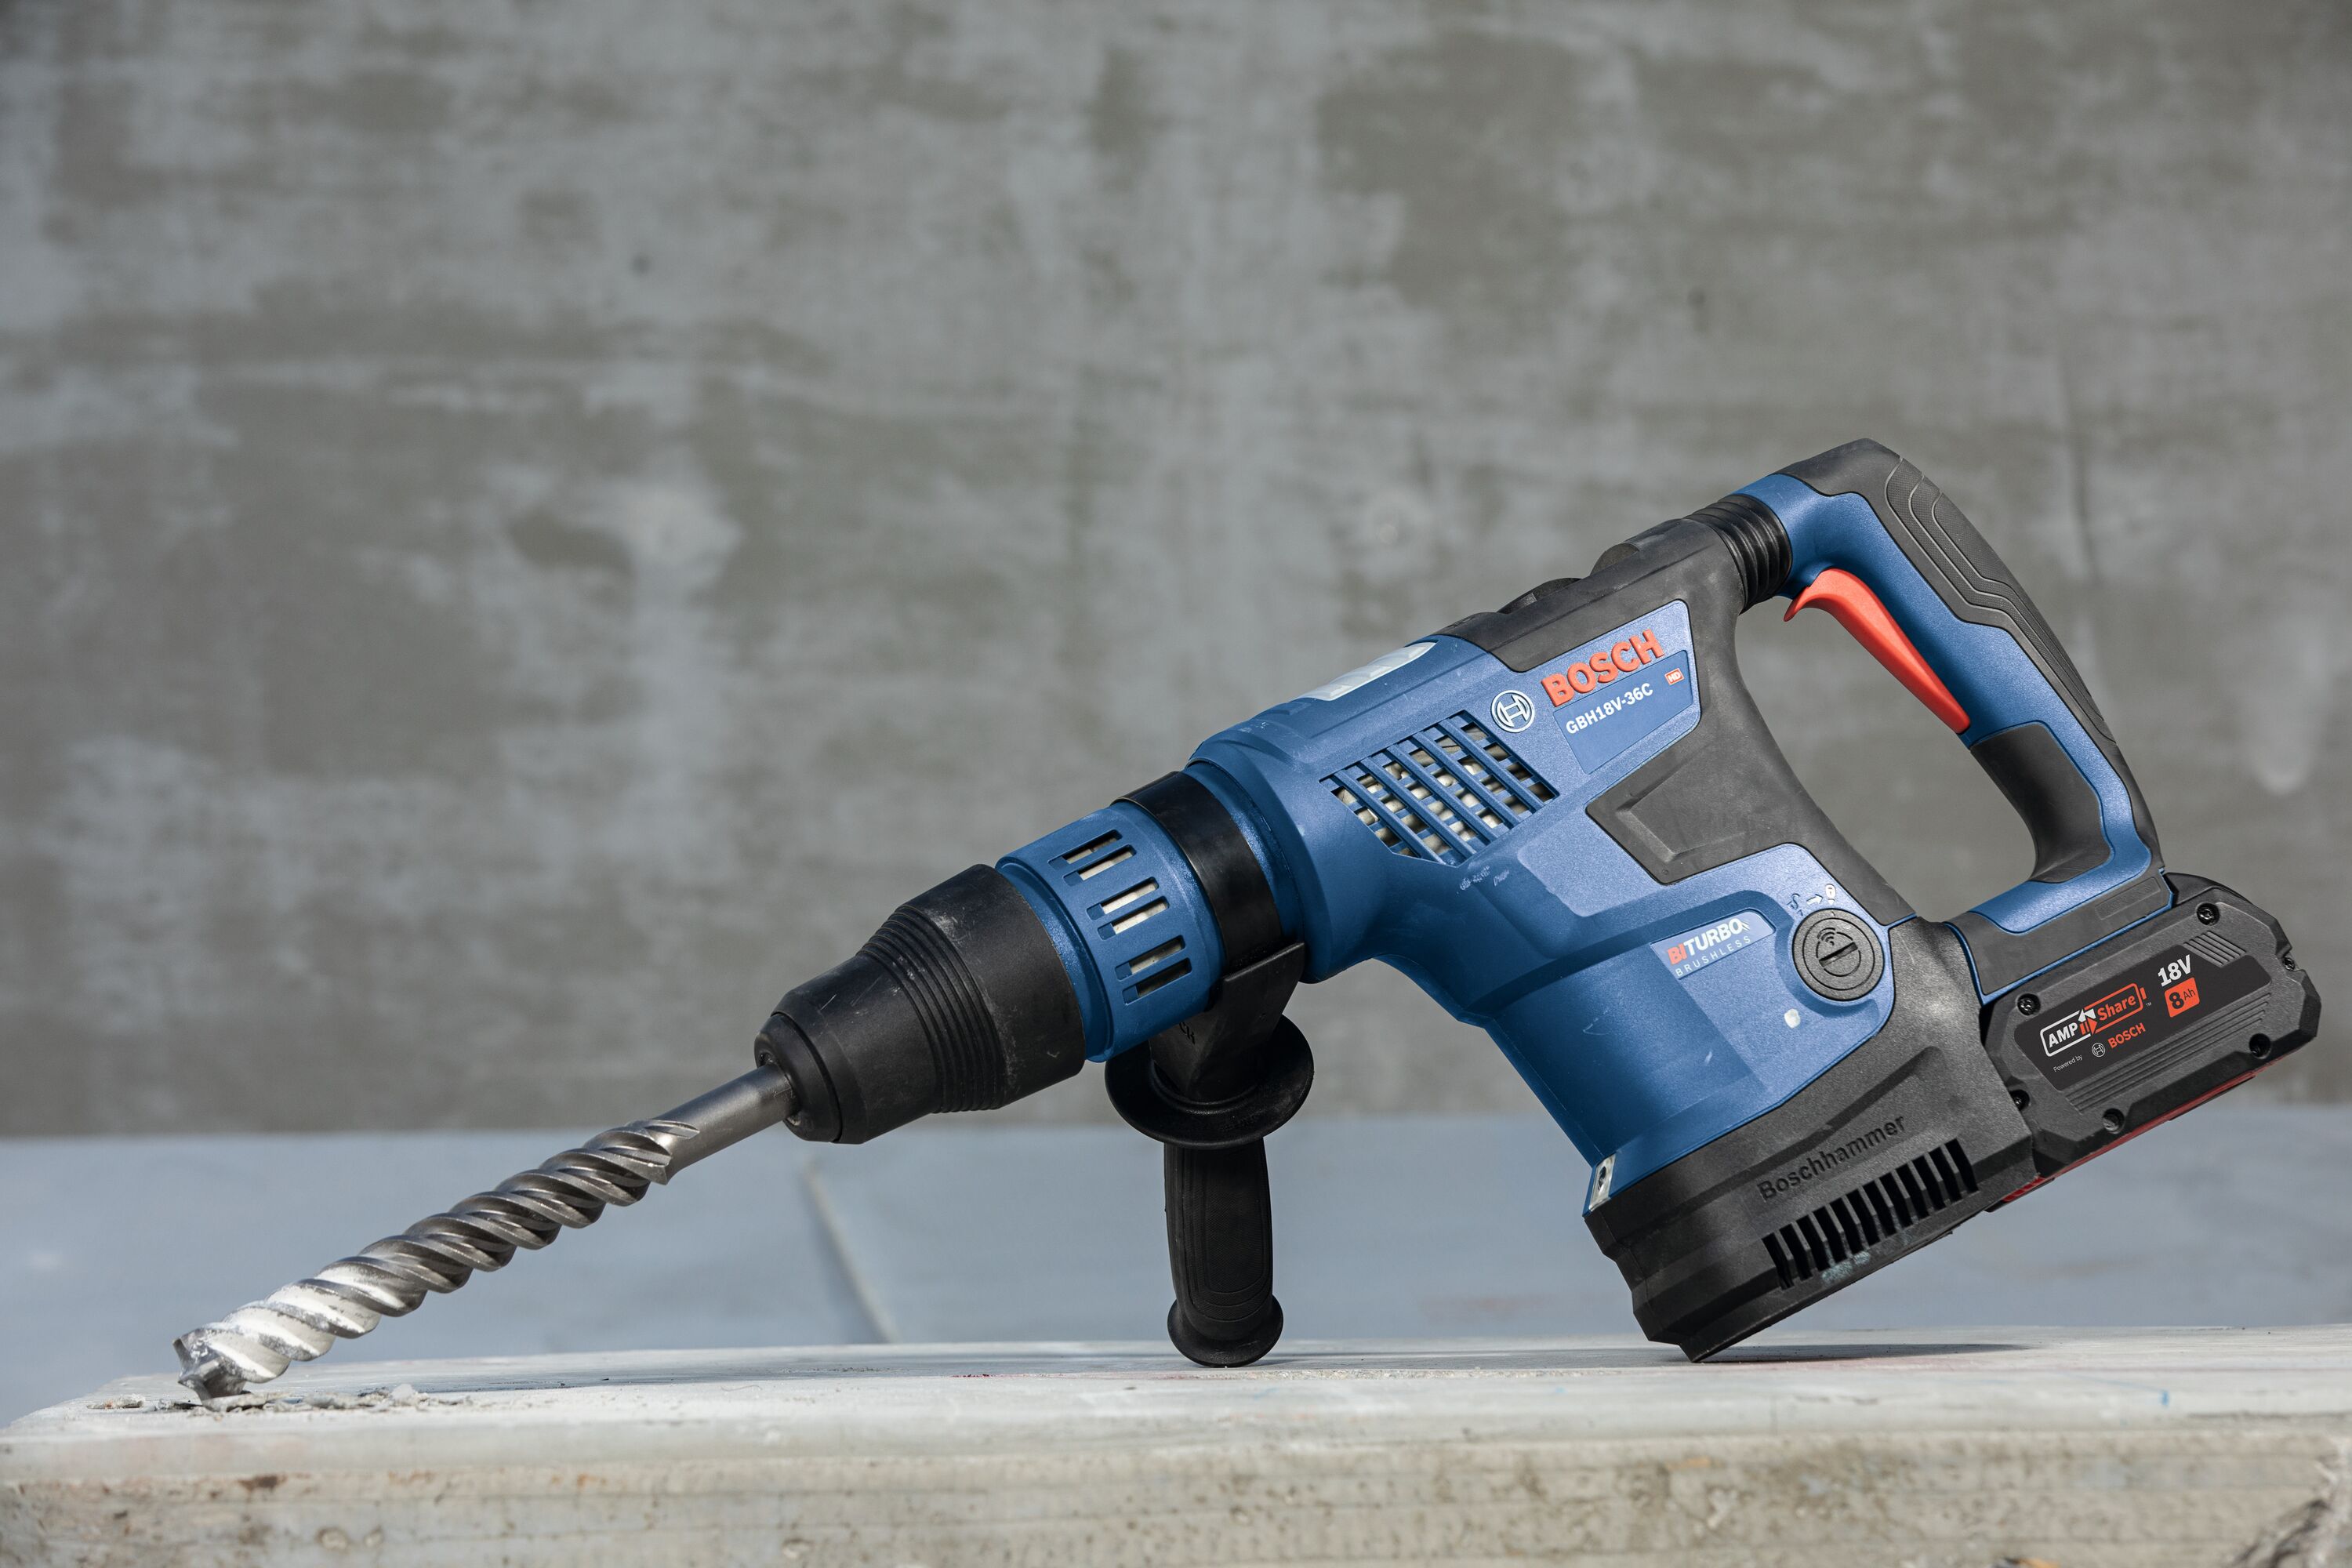 PROFACTOR Sds-max Tool) 1-9/16-in 18-volt Drills in at Hammer department Hammer the (Bare Rotary Drill Speed Cordless Rotary Bosch 8-Amp Variable